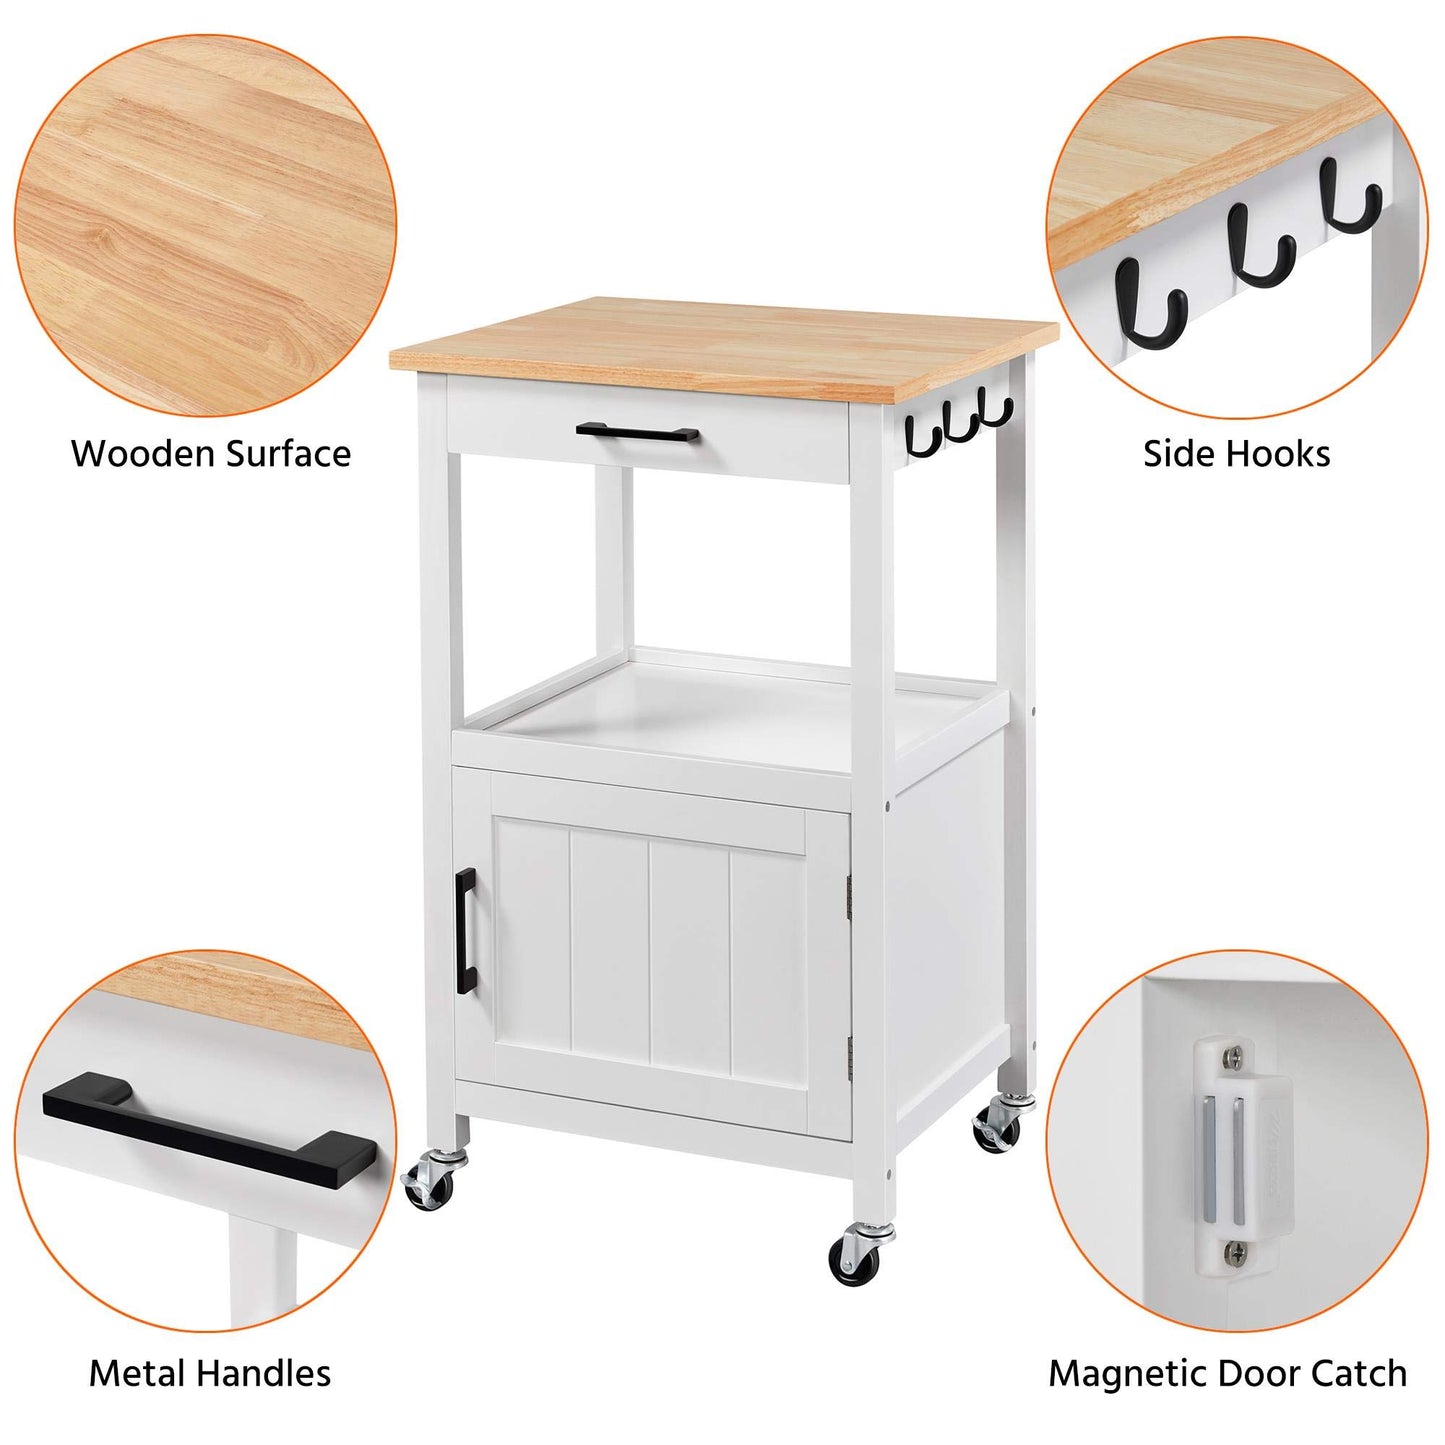 Yaheetech Rolling Kitchen Island with Single Door Cabinet, Kitchen Cart with Drawer on Swivel Wheels, Small Coffee Cart Microwave Stand with 3 Side Hooks for Dining Room, White